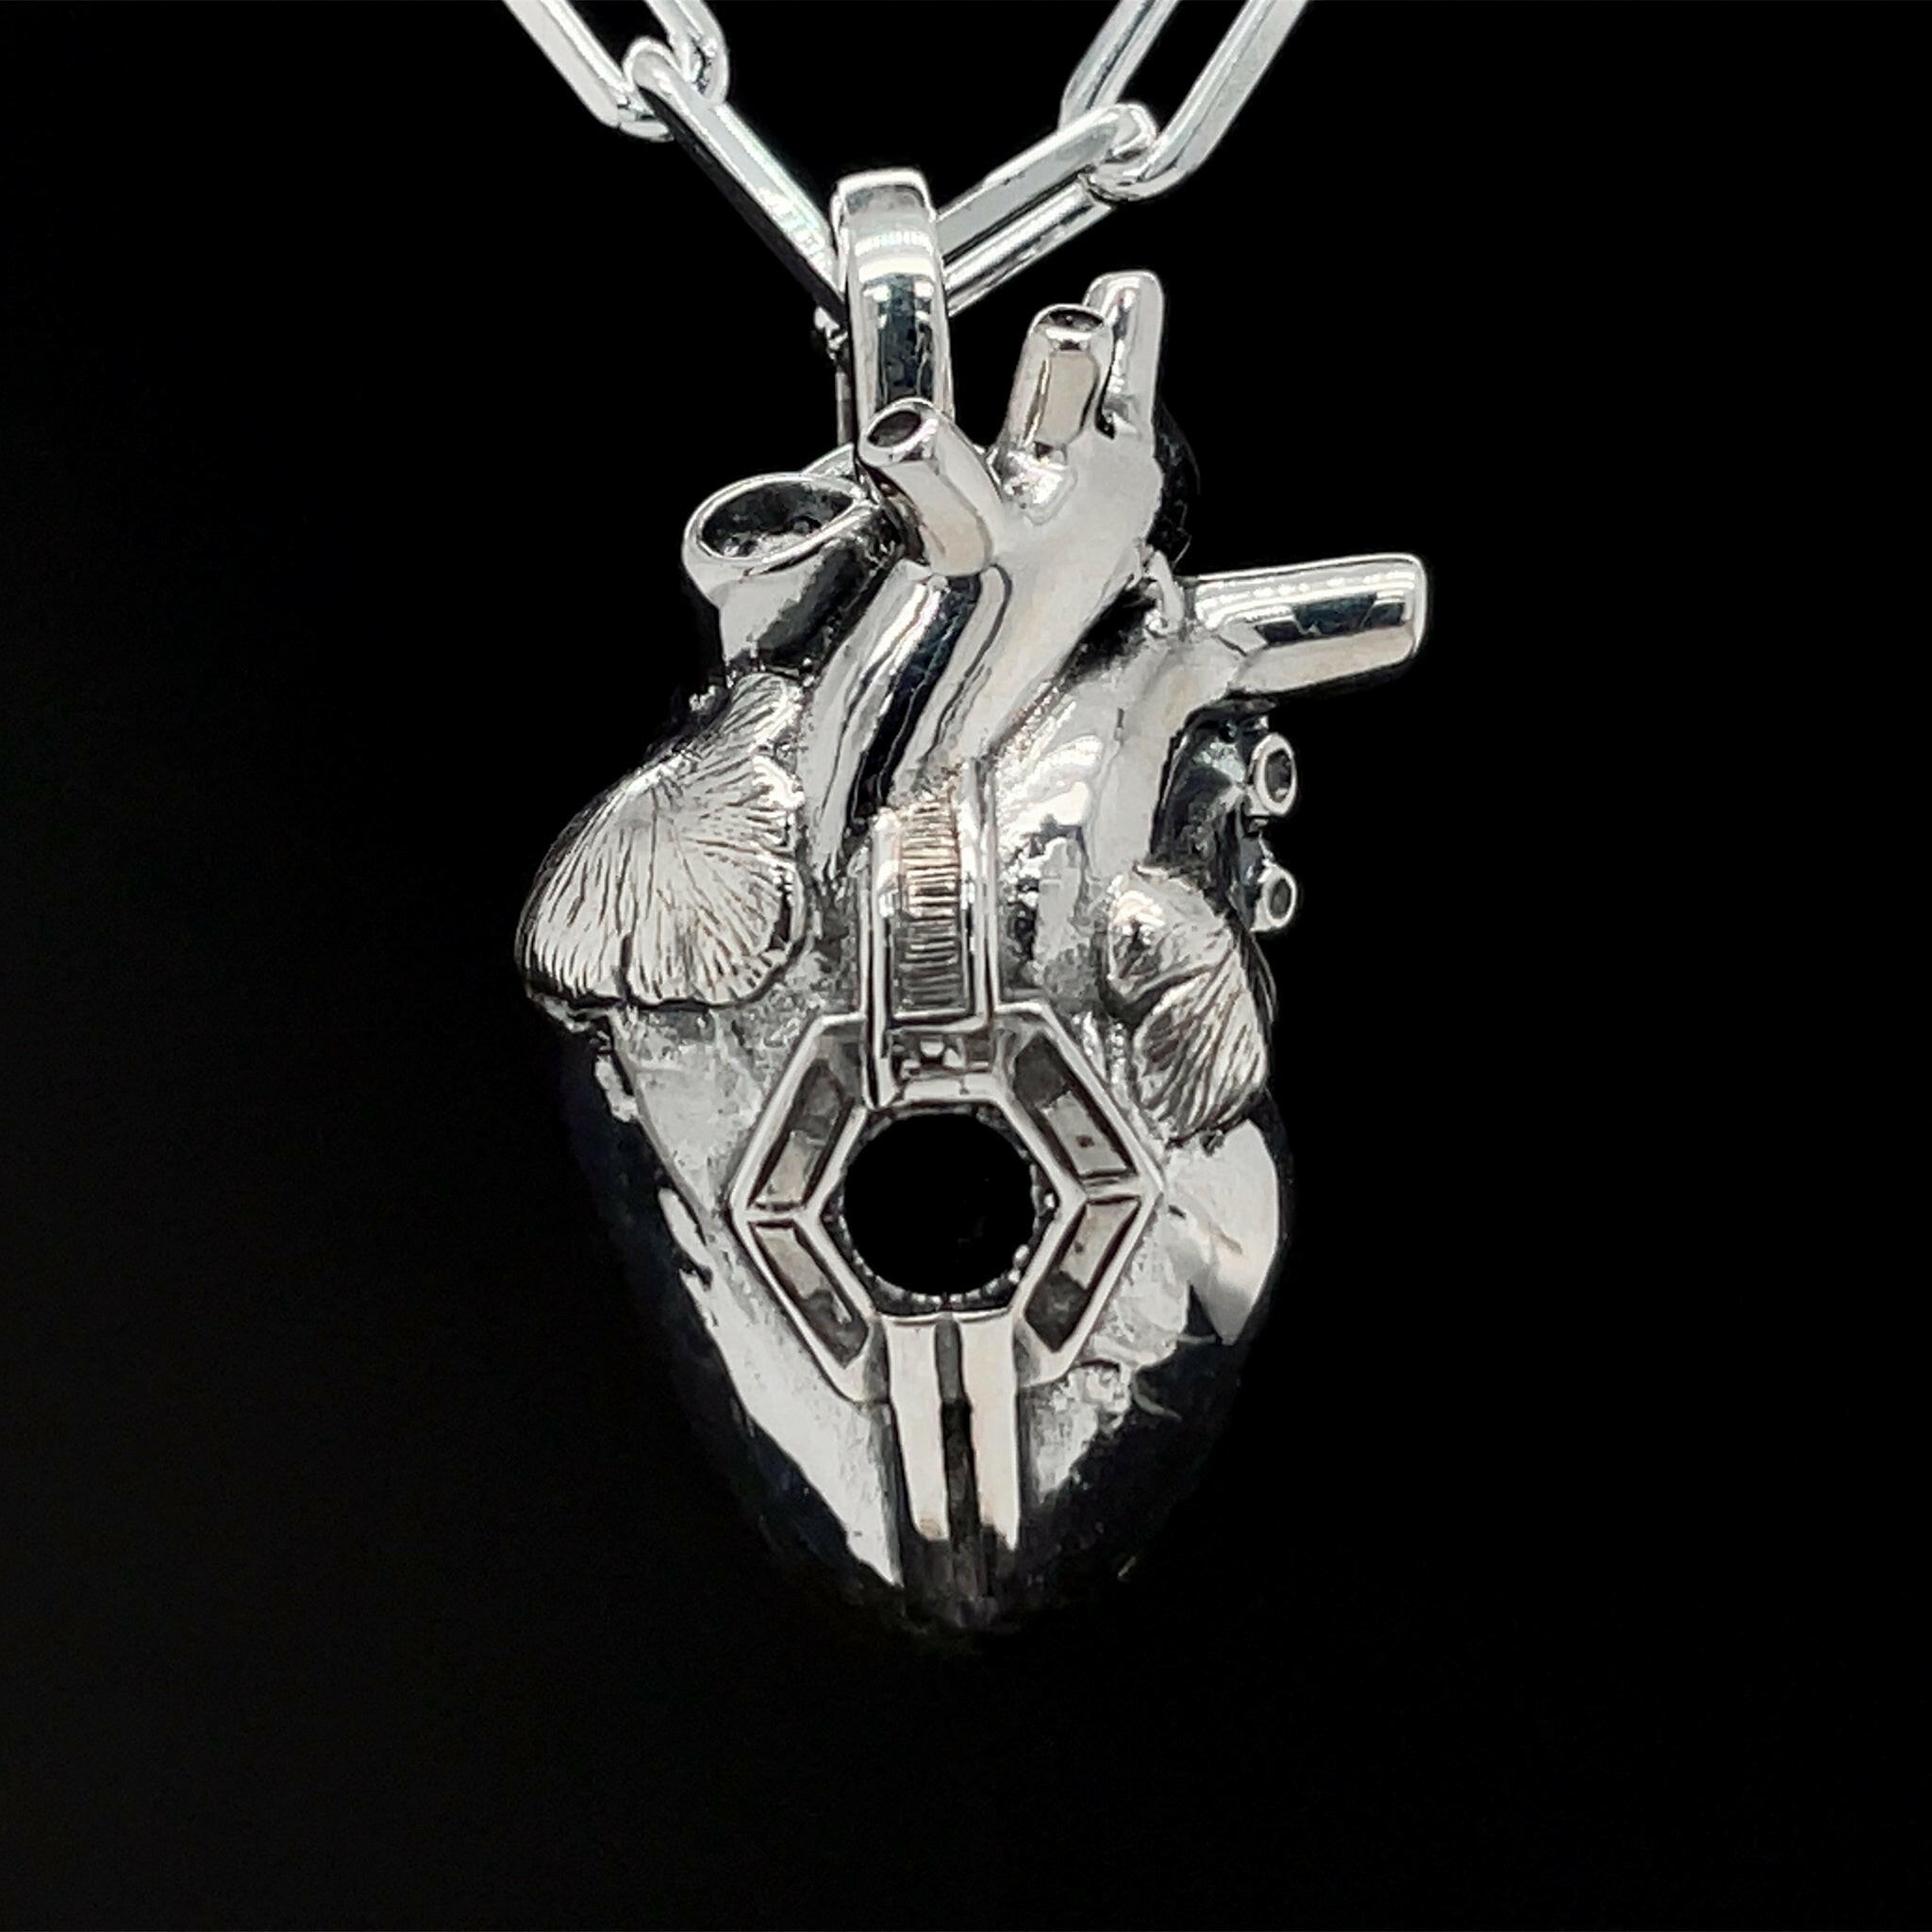 Front view of fatal flaw pendant made of sterling silver , pendant resembles an atomical heart with a hexagonal hole in the center.